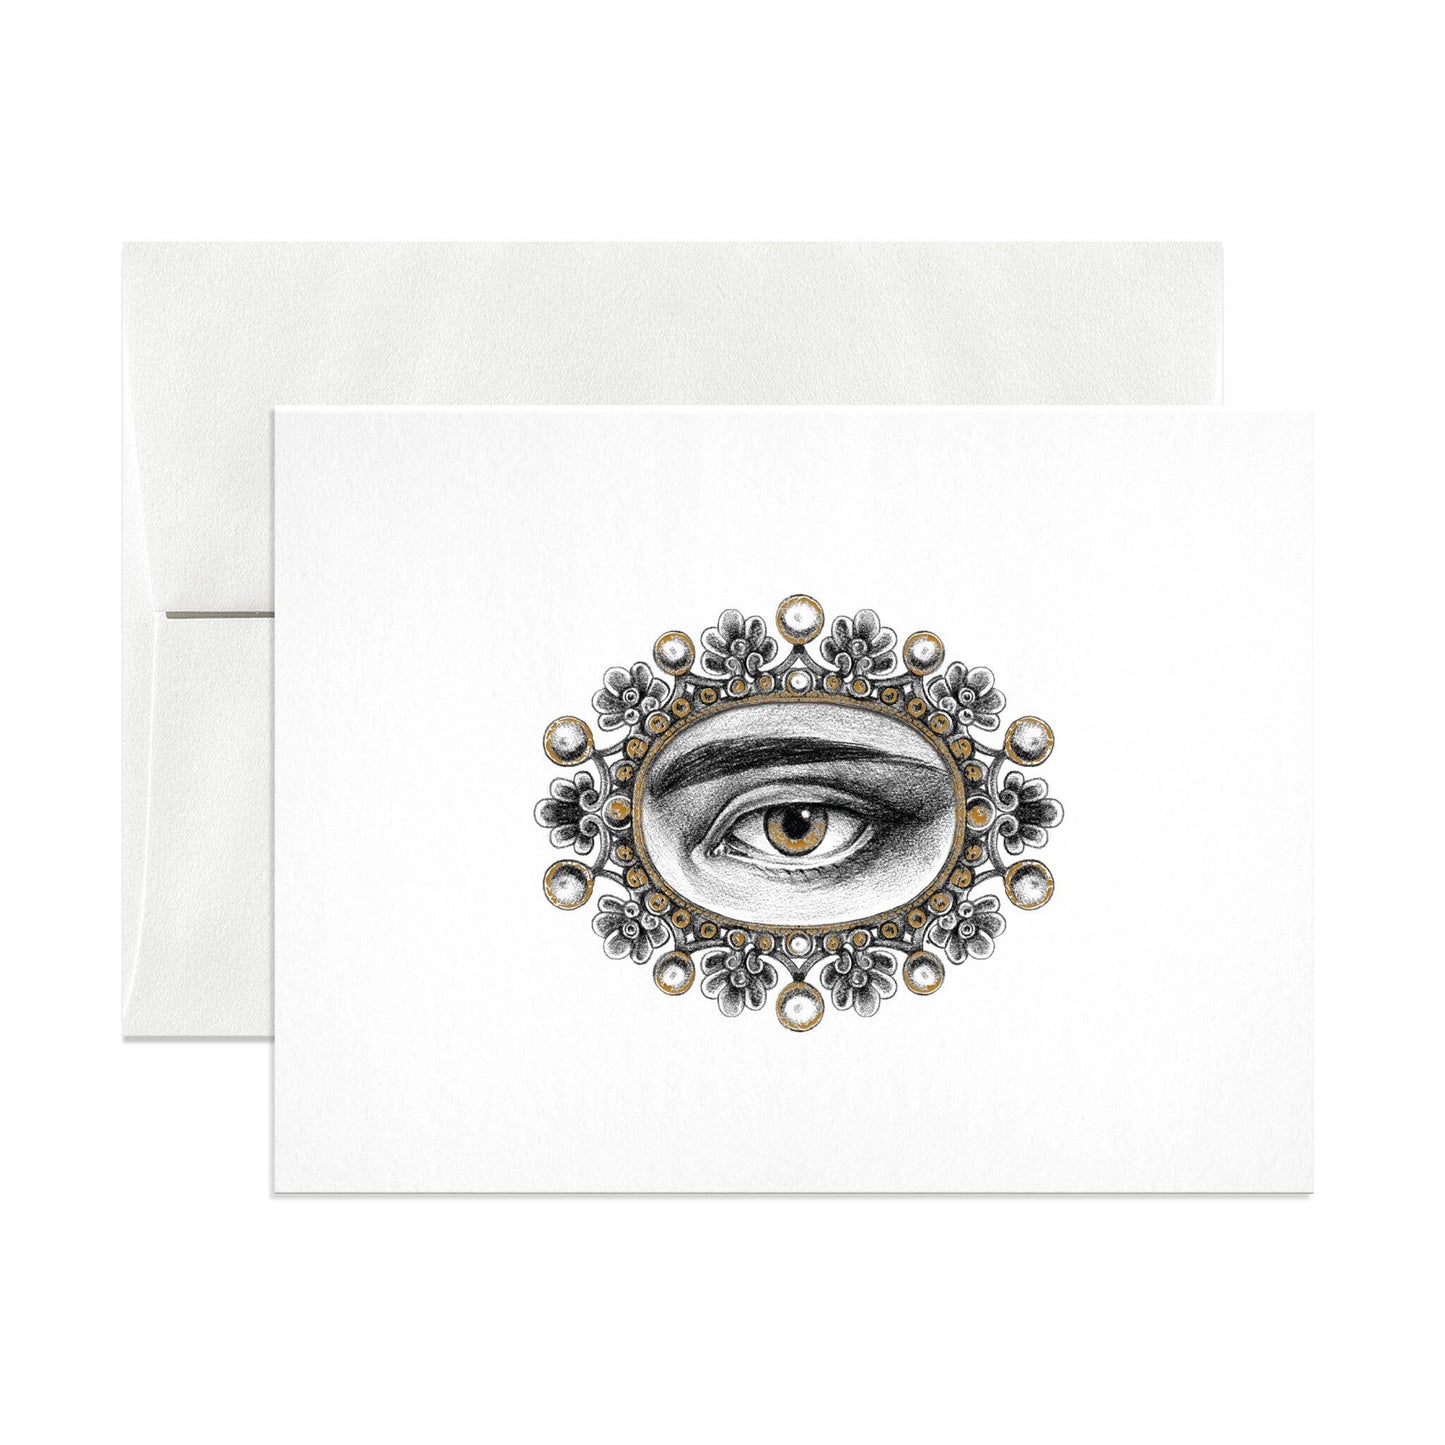 Oculus - Lover's Eye Greeting Cards - Three Styles